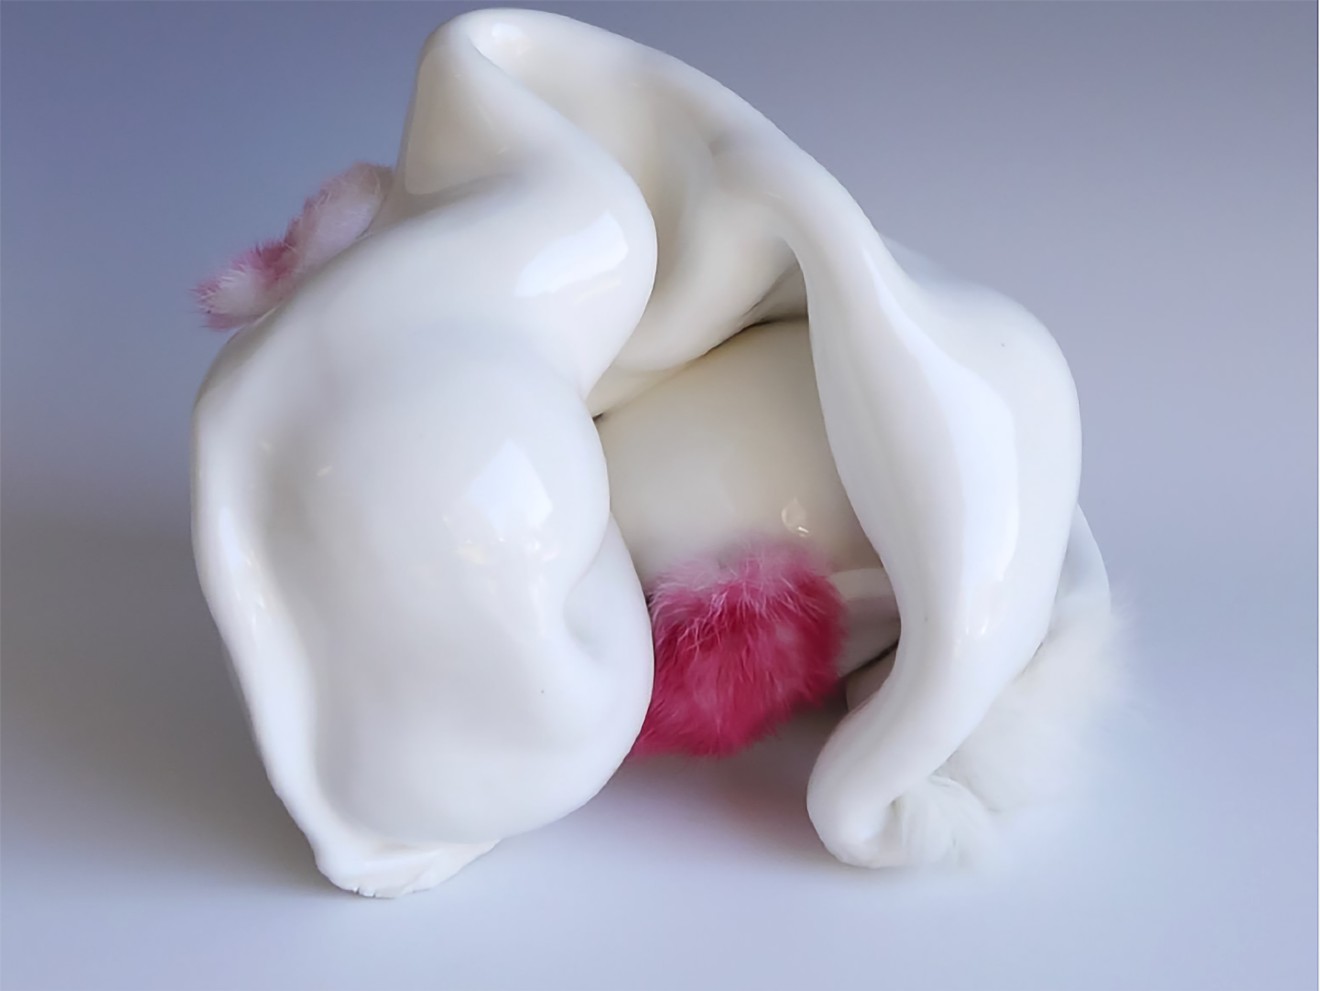 Terra Goolsby, “Snake 2”, 2022, Porcelain and fur, 7x8x9 inches